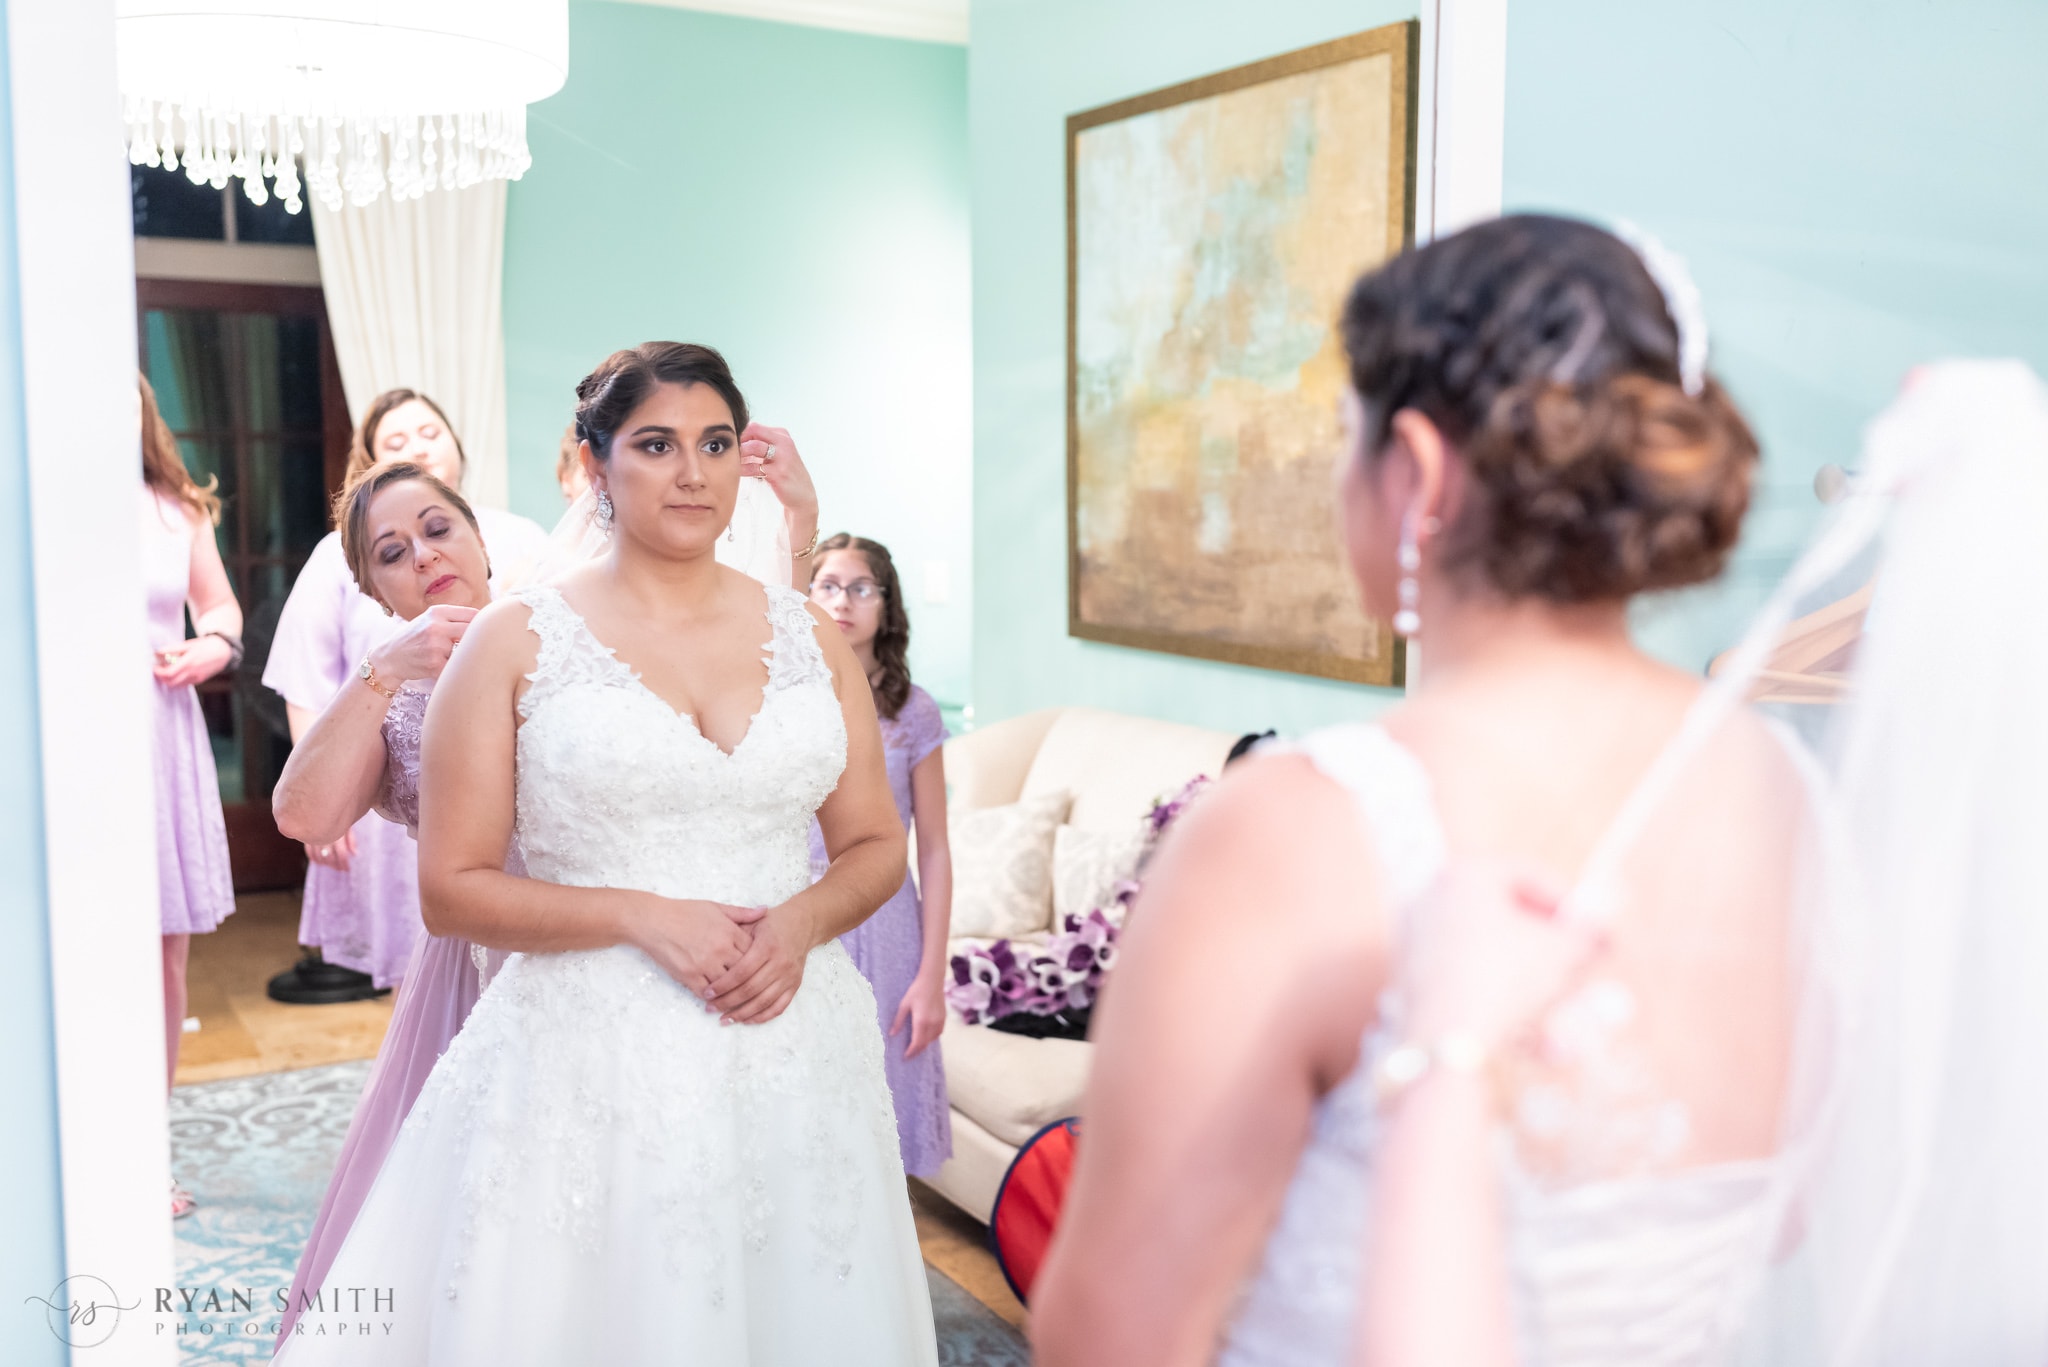 Bride's mother putting on brides veil in mirror - 21 Main Events at North Beach